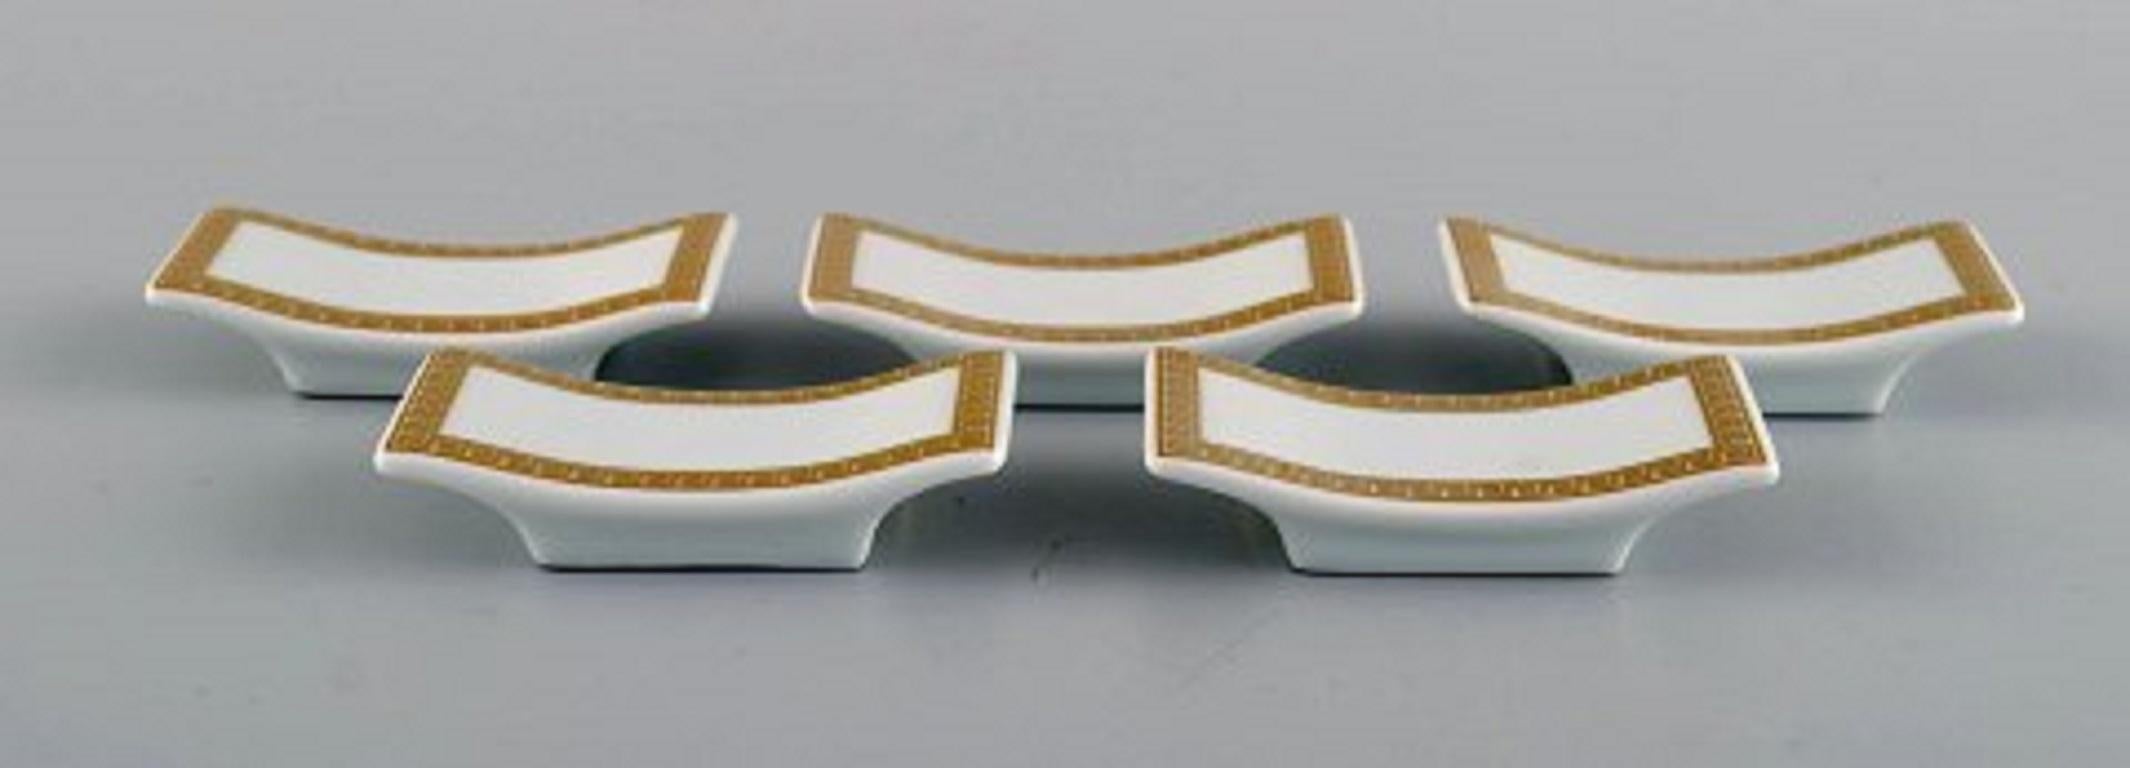 Gianni Versace for Rosenthal. Five knife rests in white porcelain with gold ornamentation, late 20th century.
Measures: 7.5 x 2 cm.
In perfect condition.
Stamped.
 